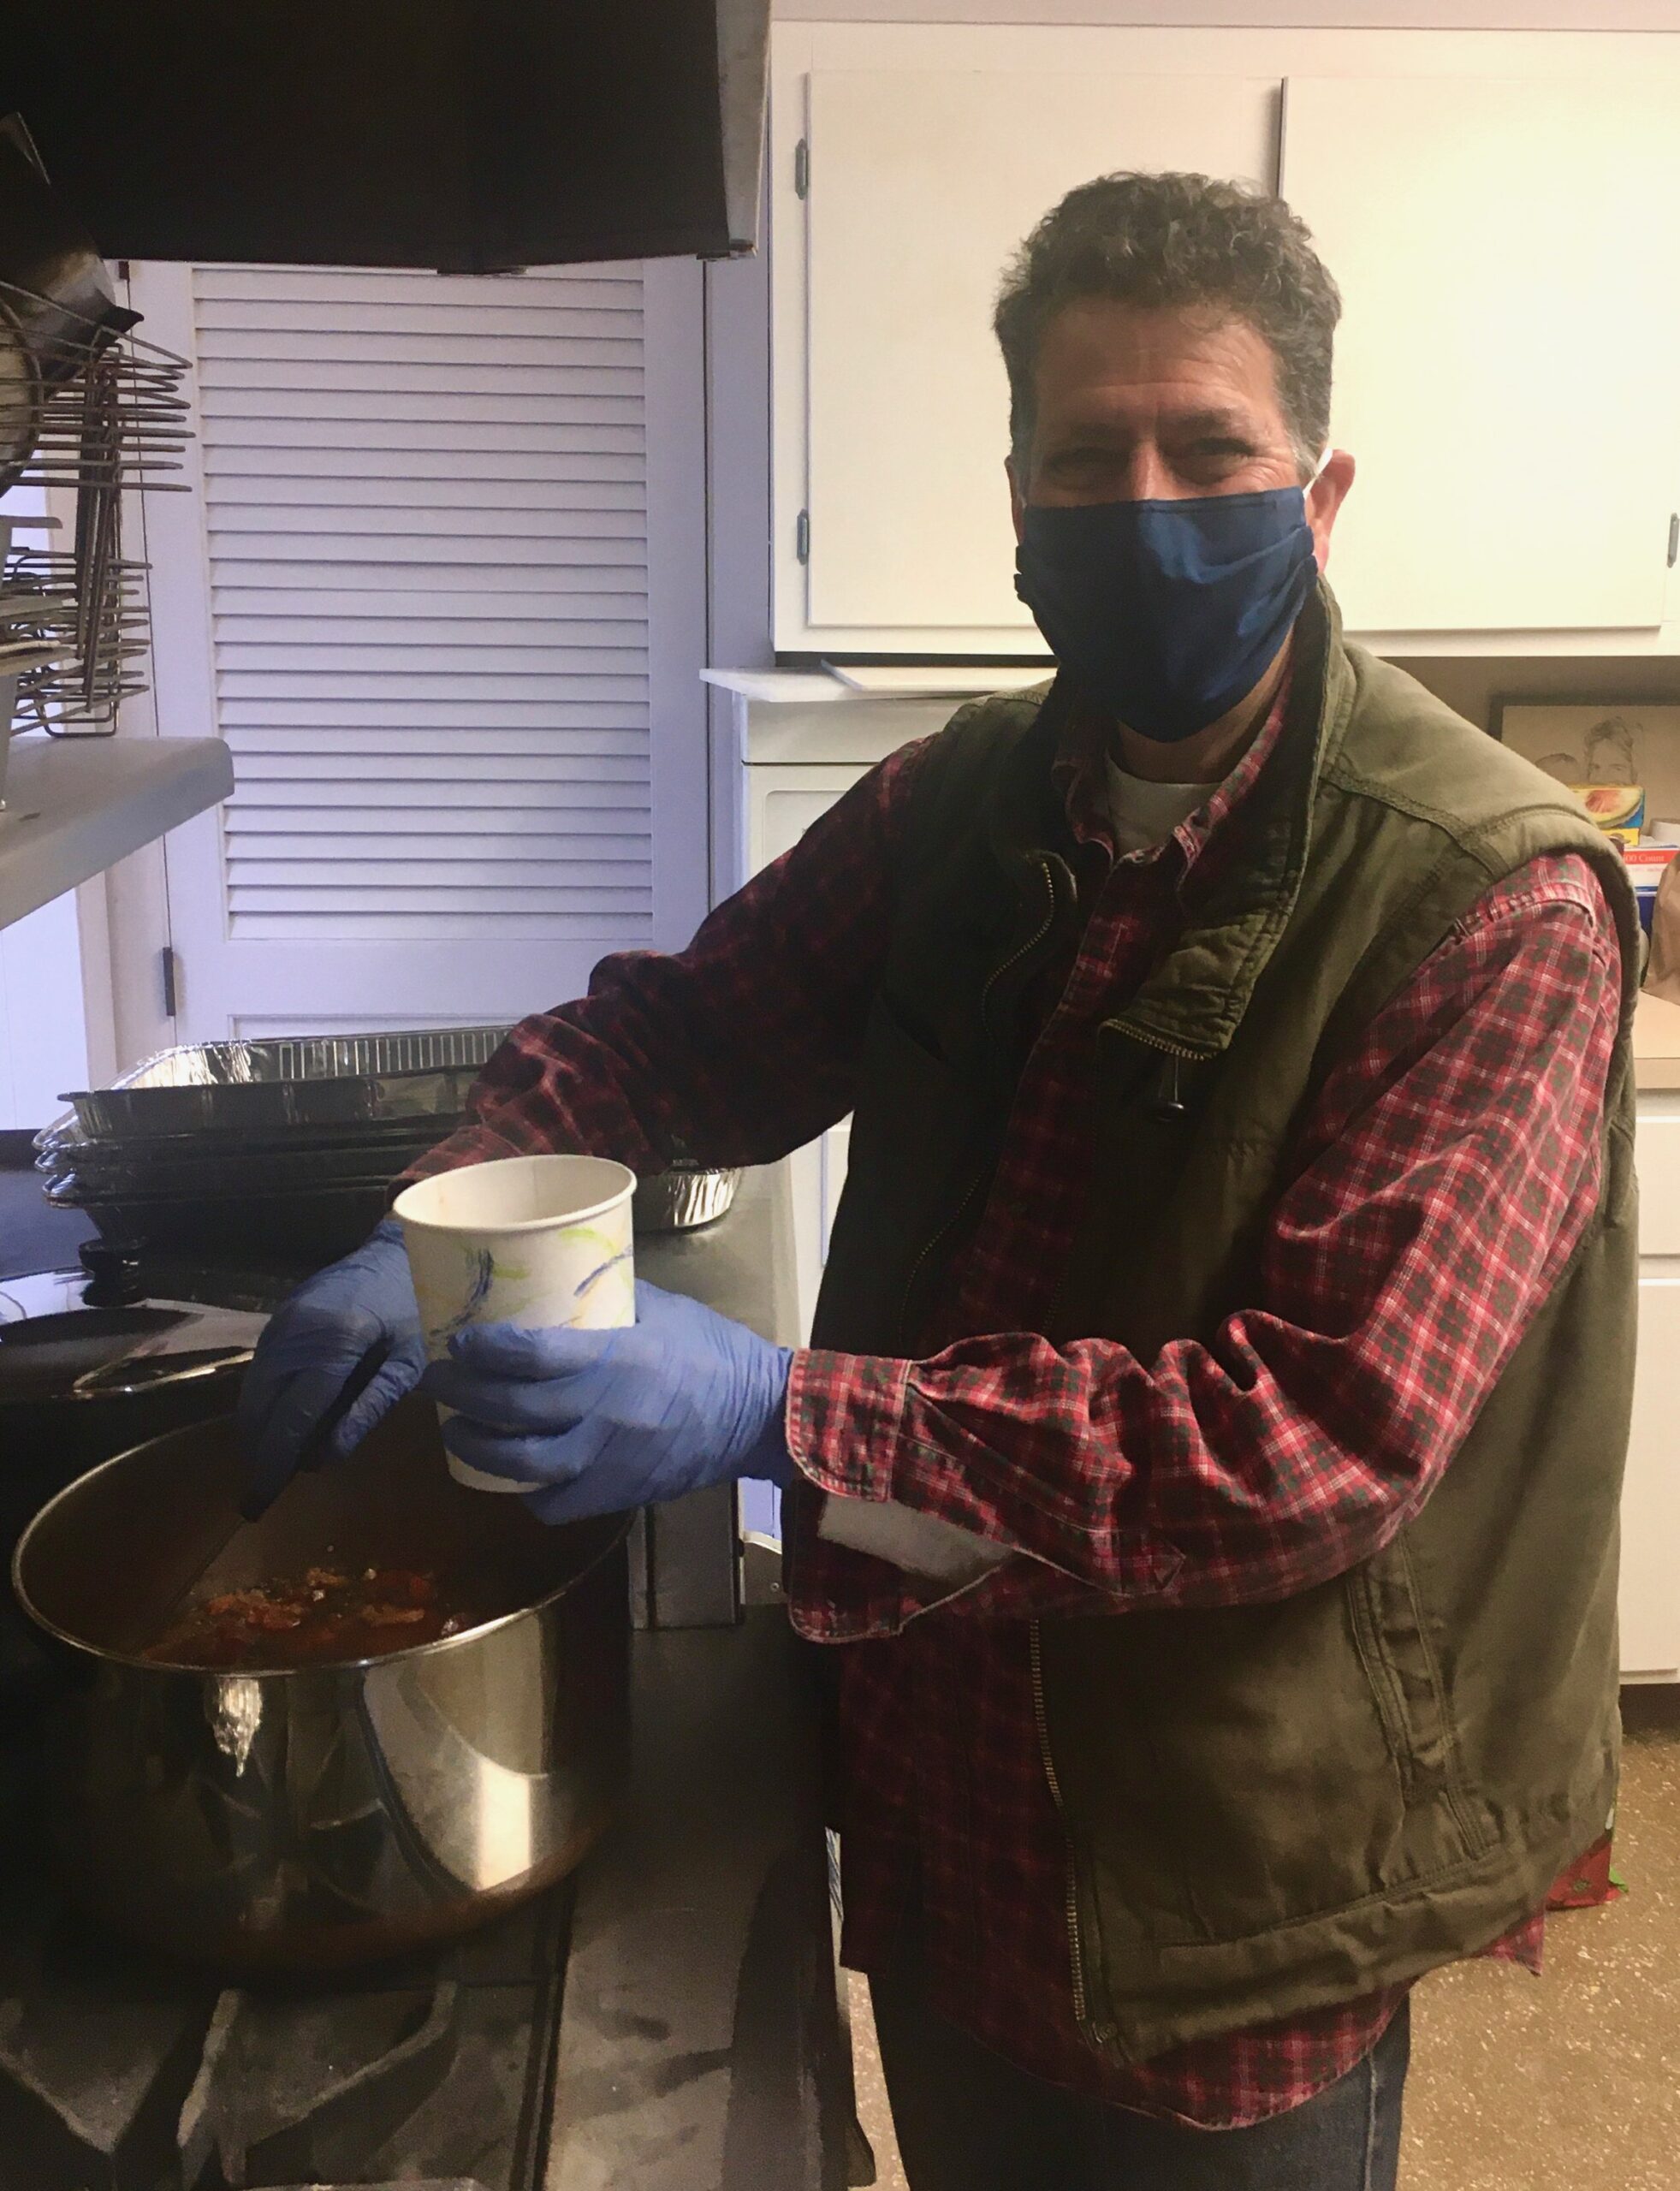 Food for thoughtful: Resident takes pride in free ‘community suppers’